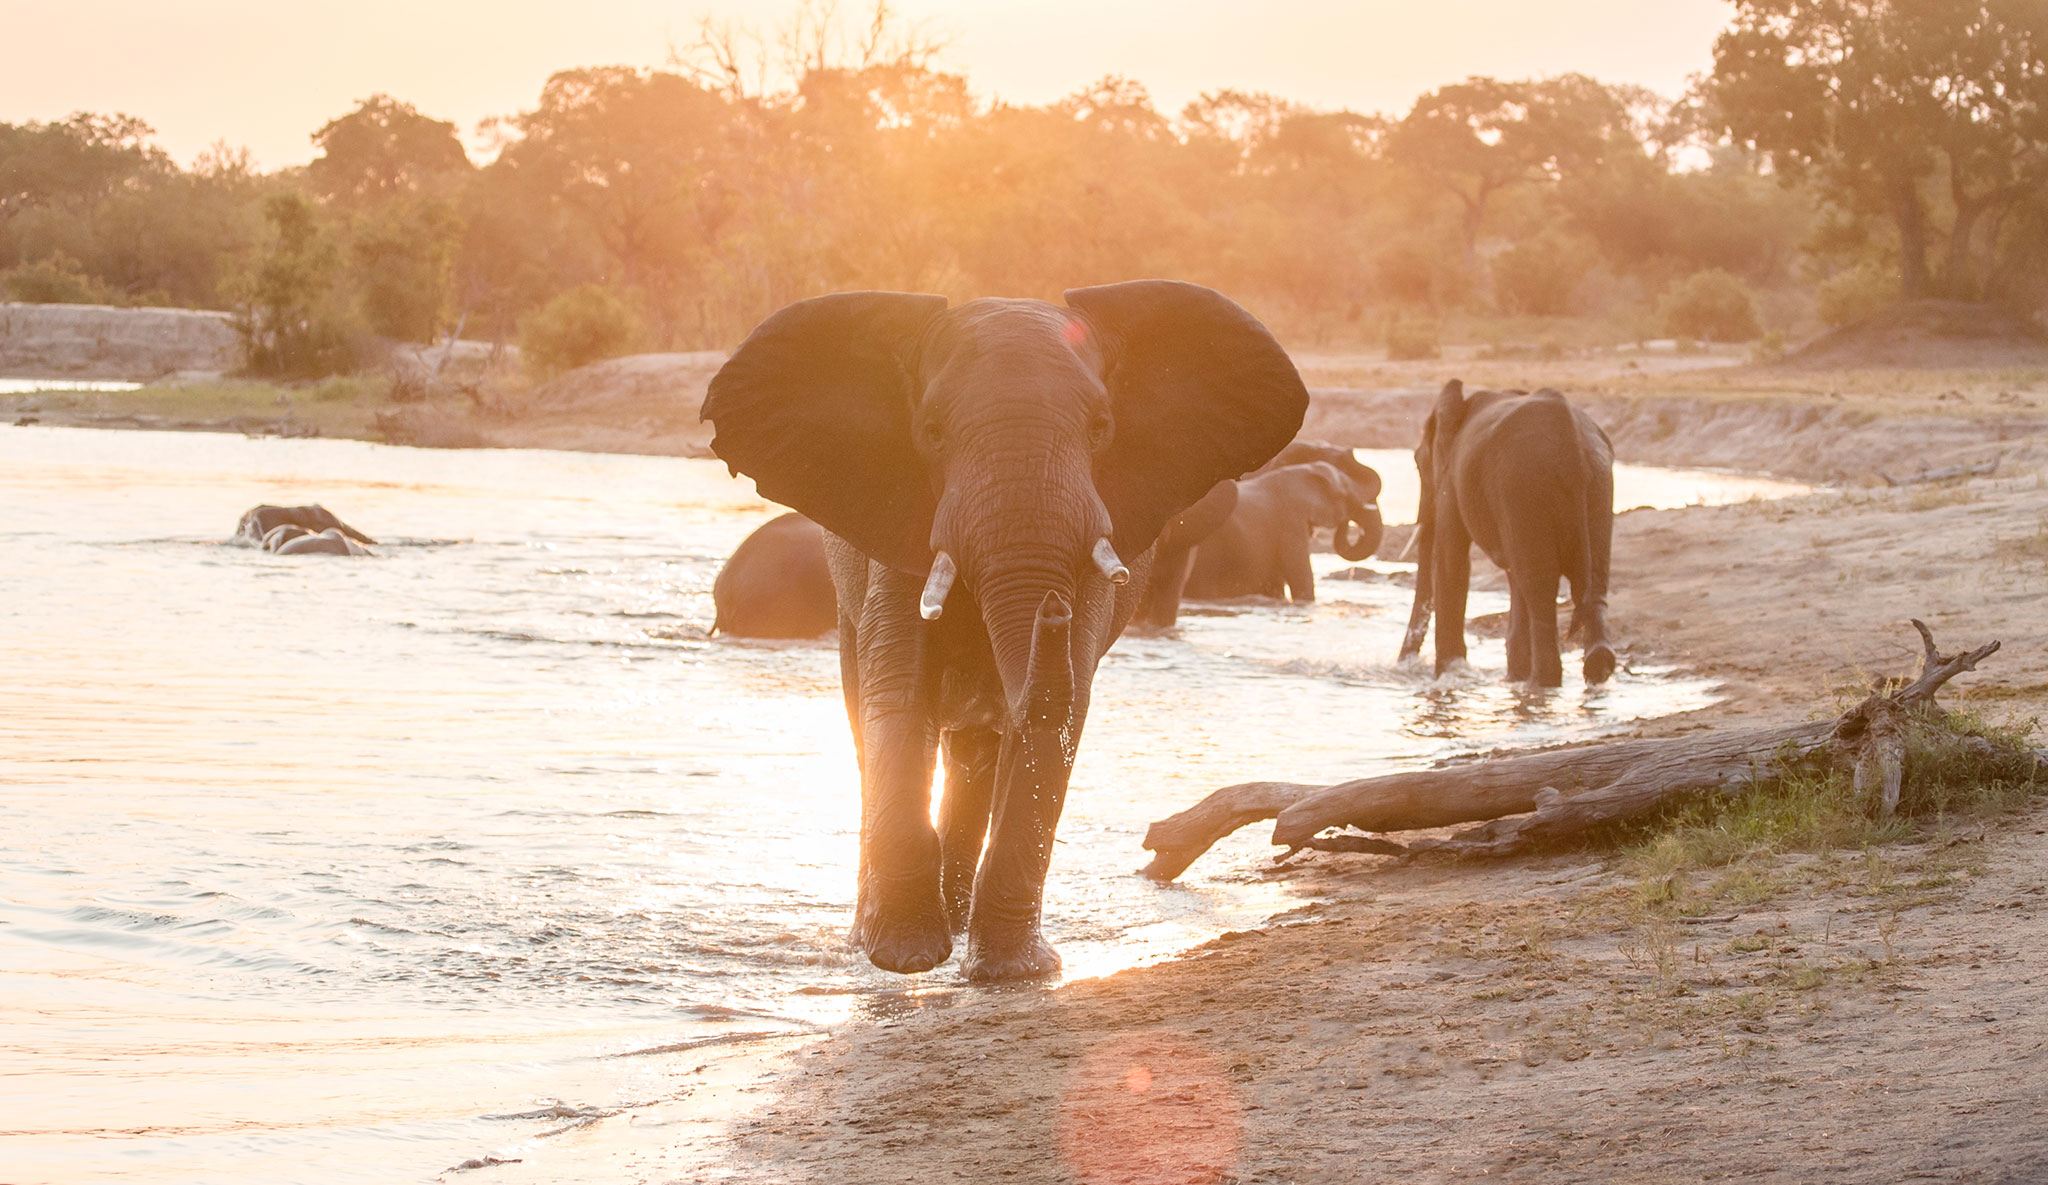 Elephants at Silvan in Kruger, one of Africa's most special national parks